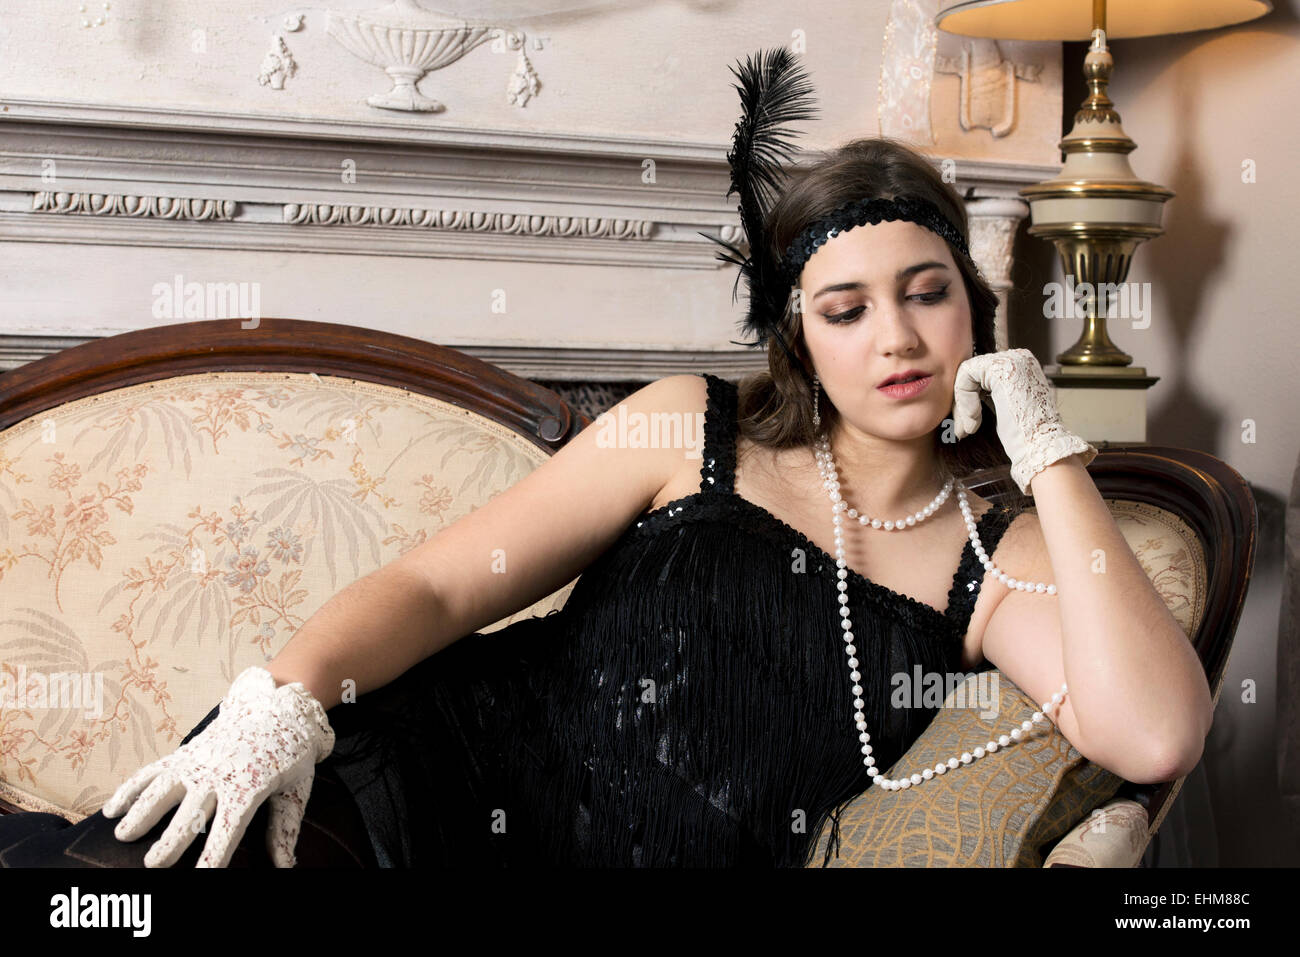 A portrait of a woman dressed in vintage 1920's flapper style clothing Stock Photo